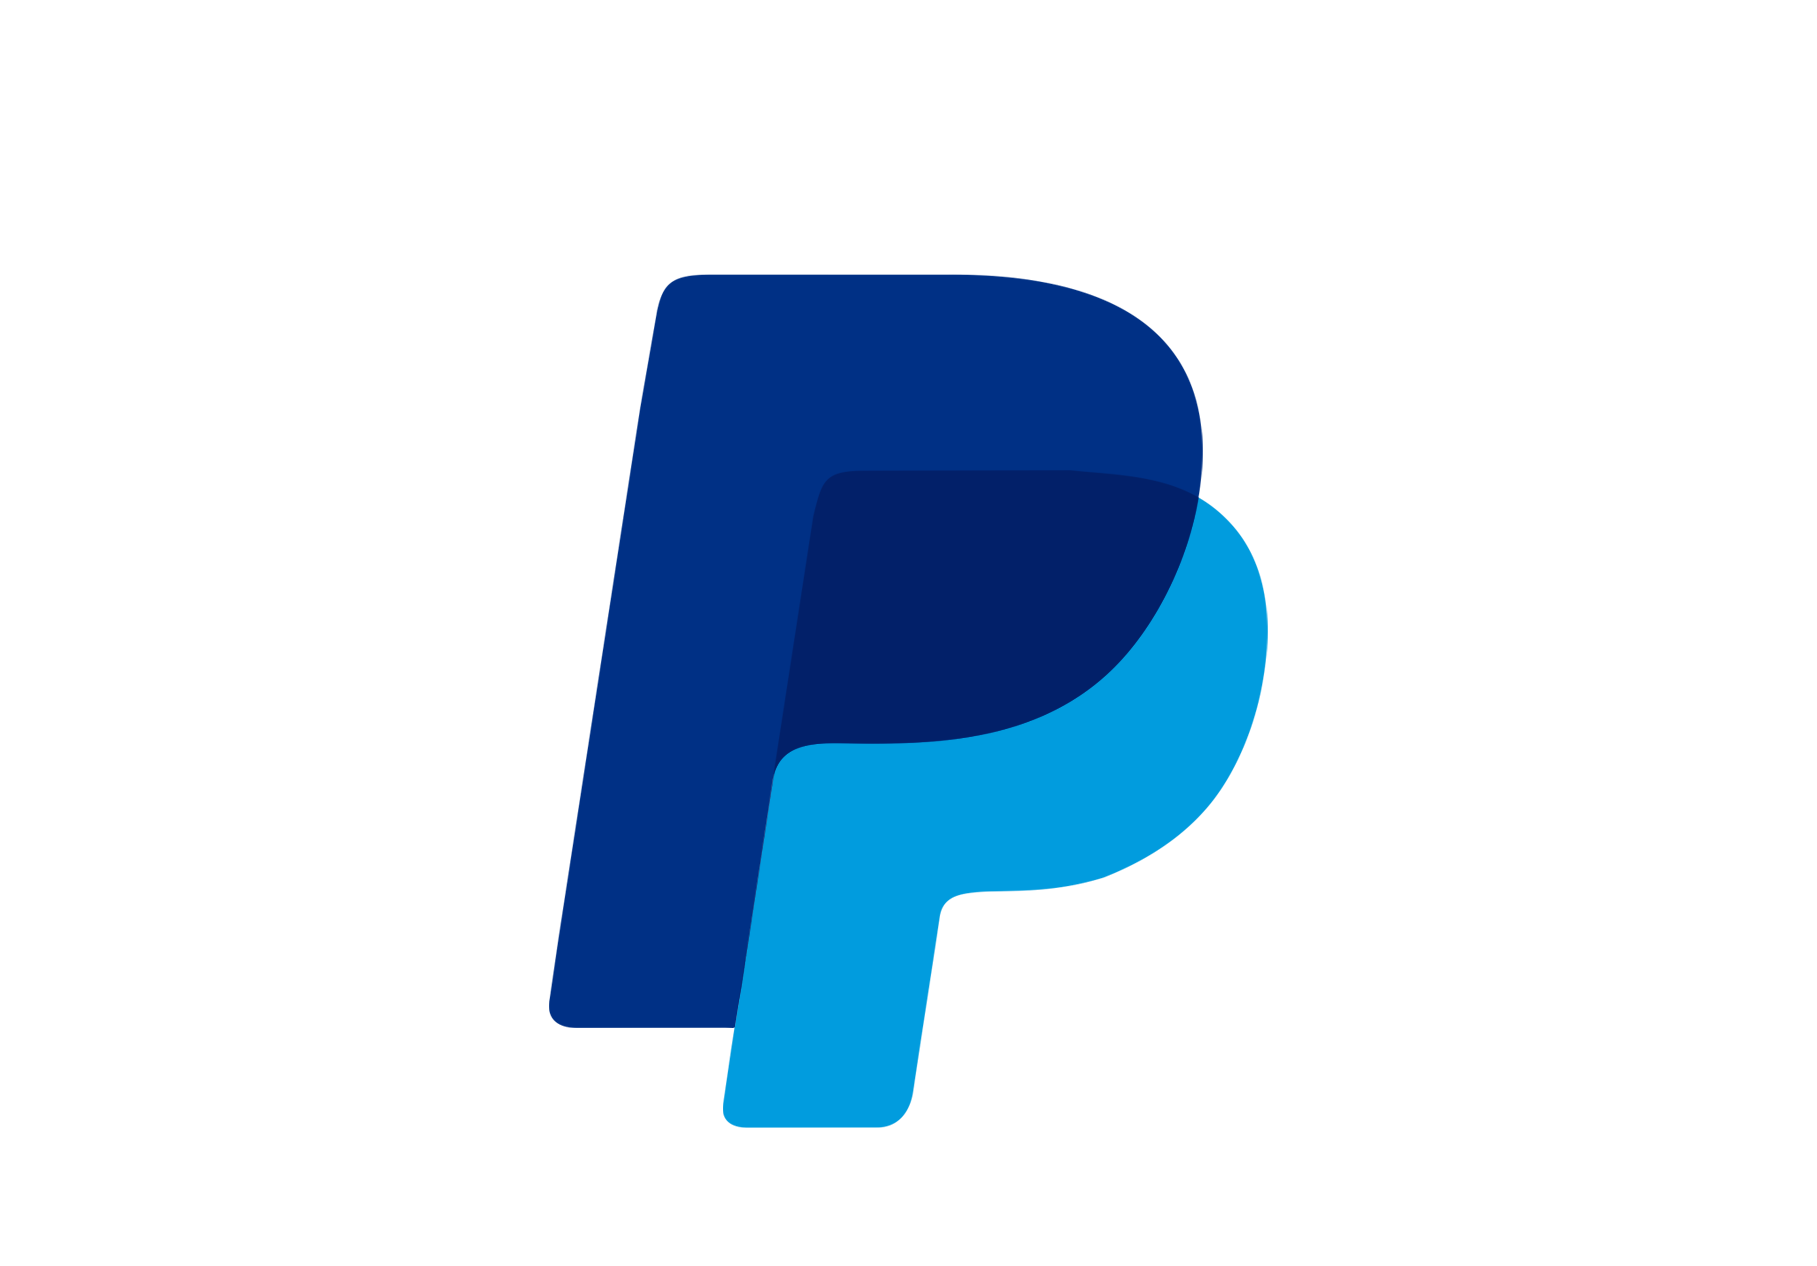 download paypal